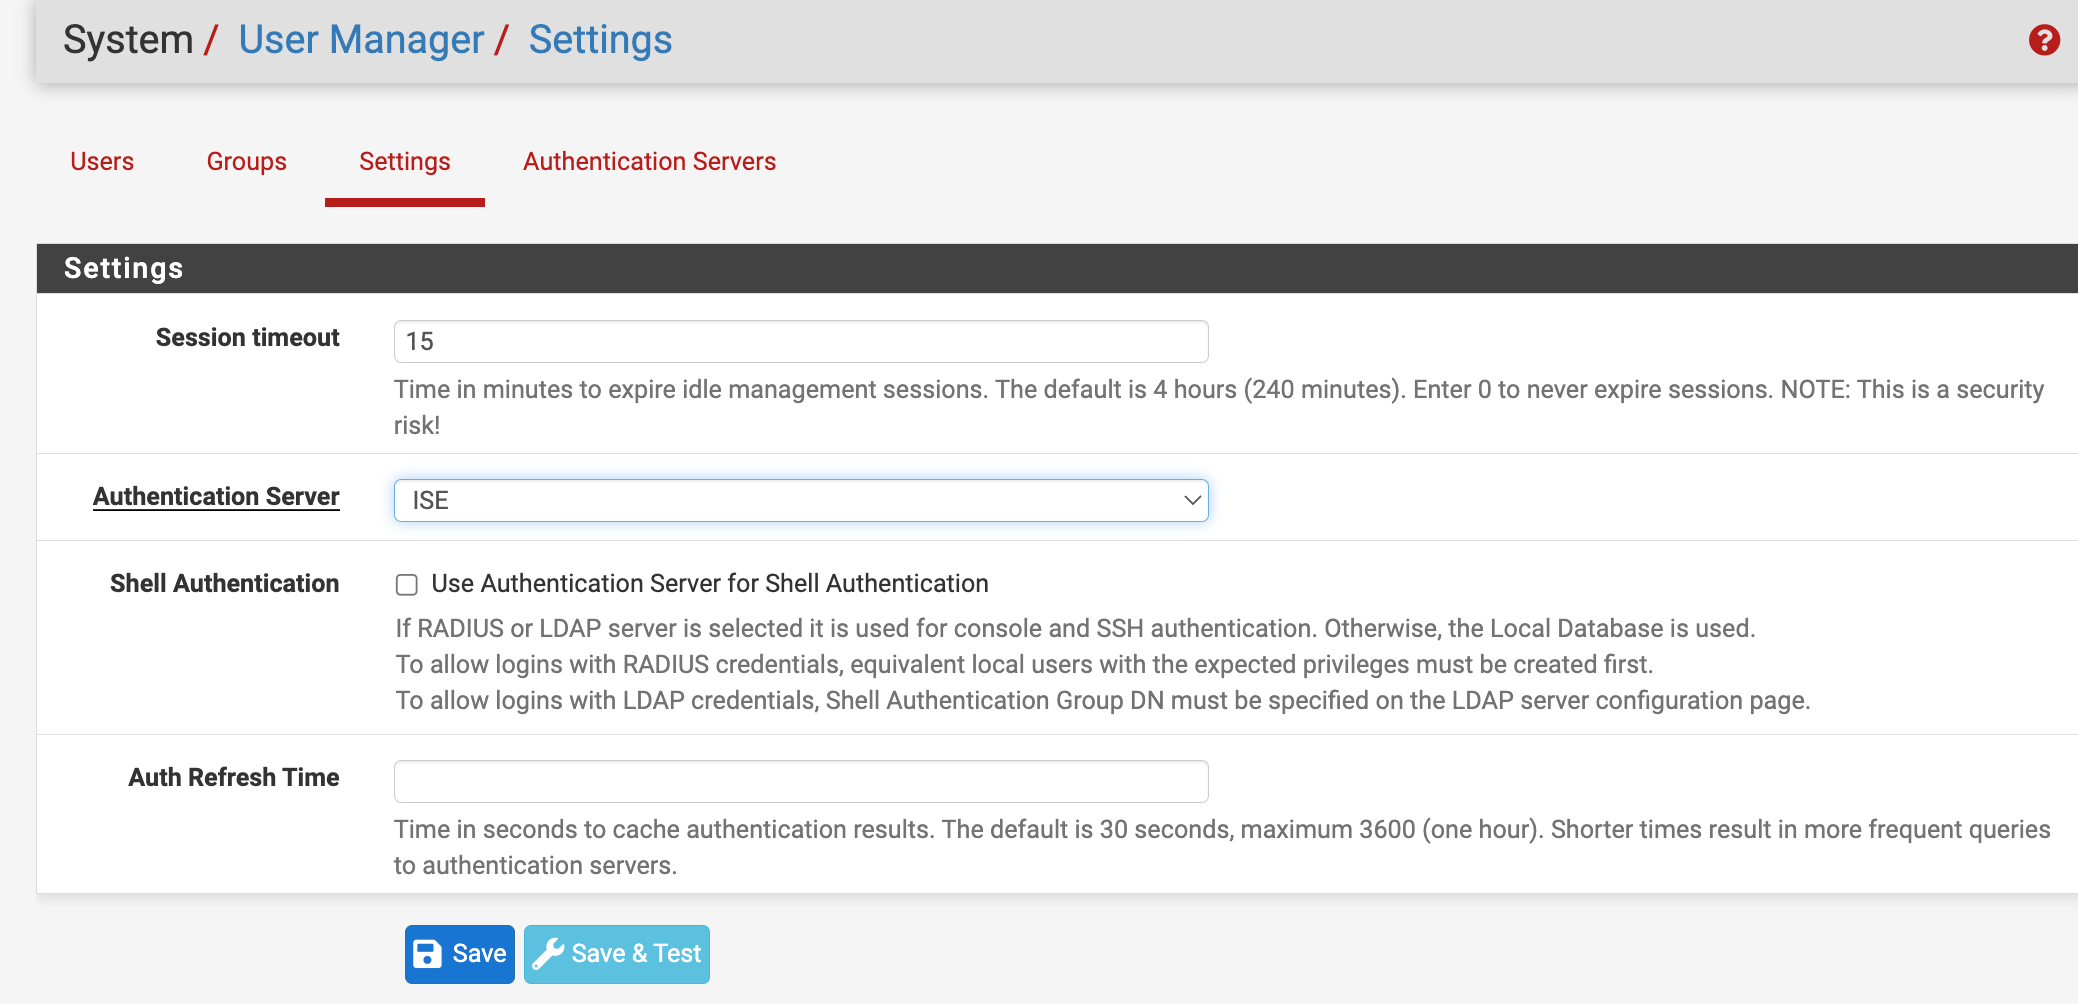 pfSense user manager settings enabling the use of ISE for authentication.